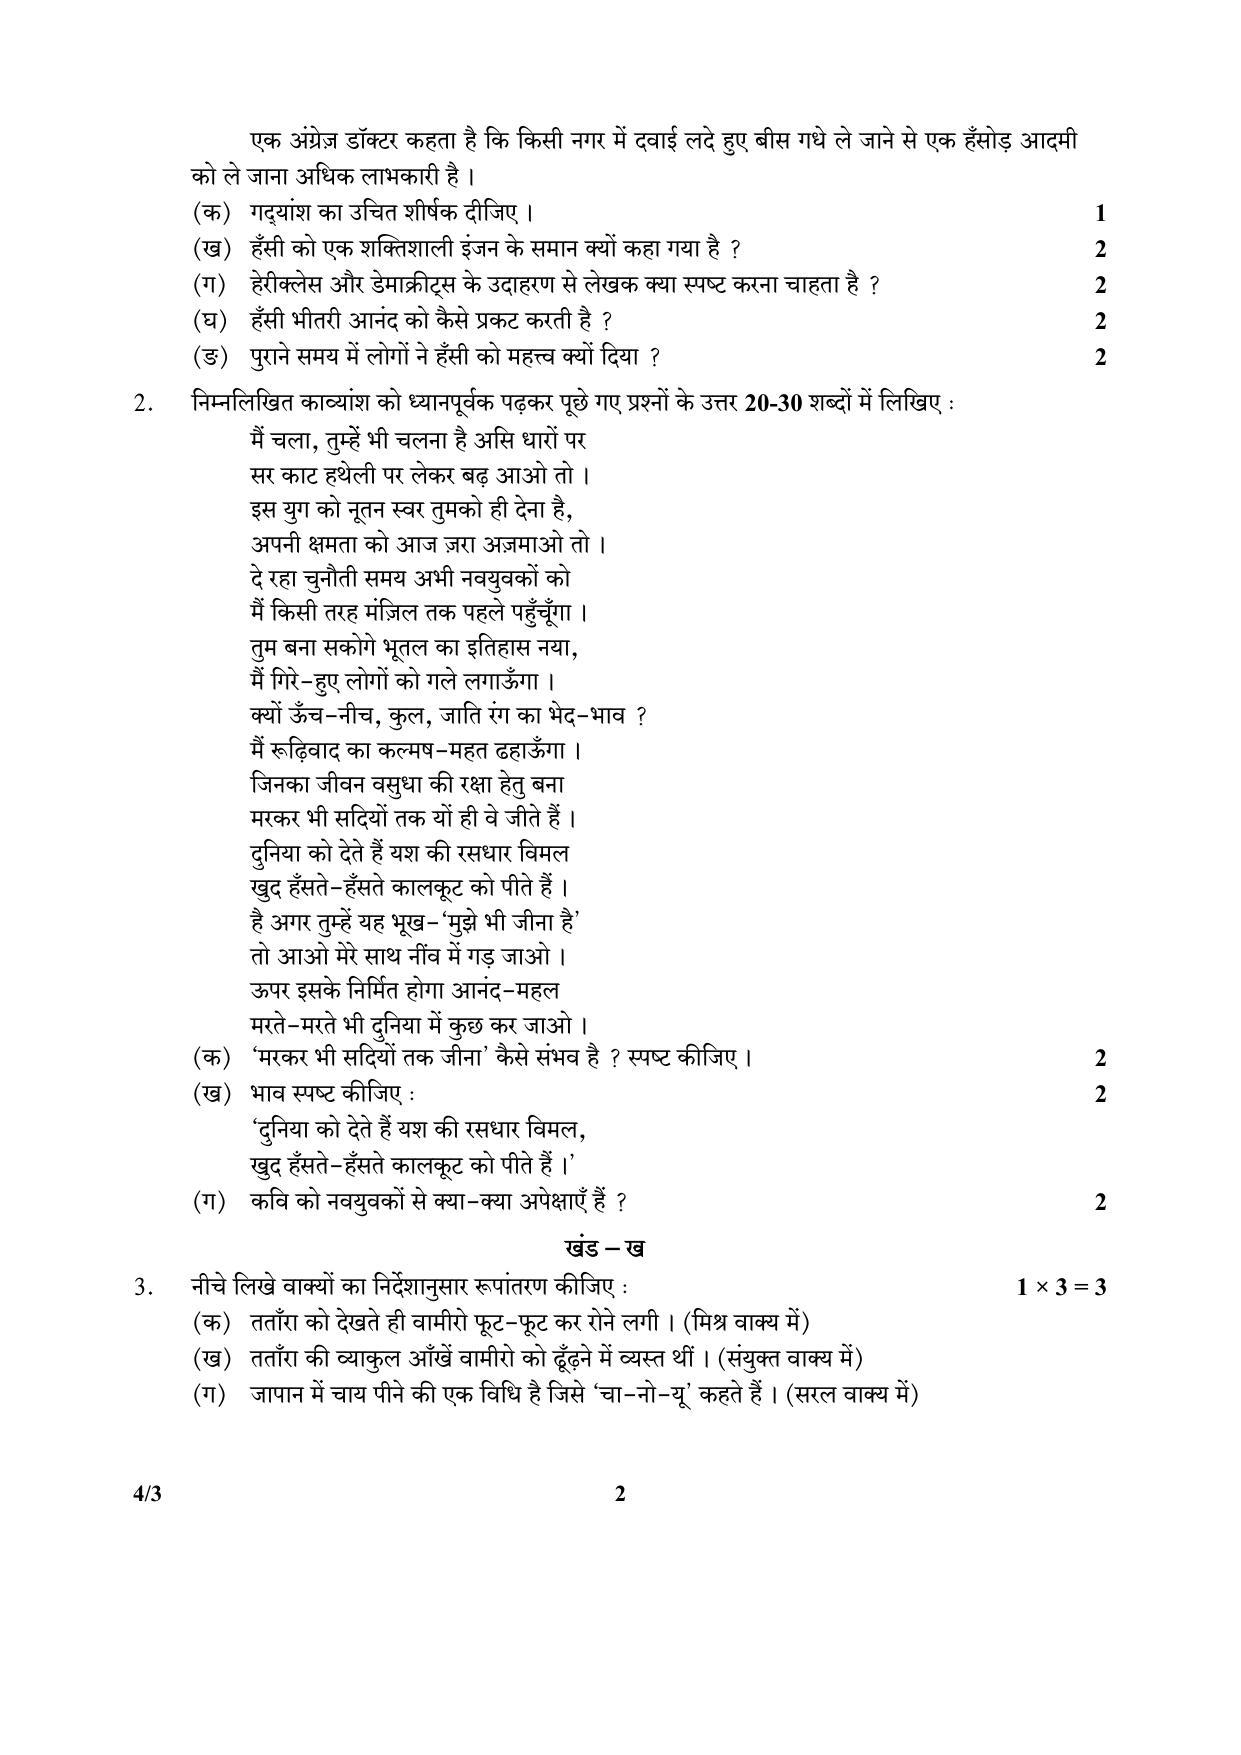 CBSE Class 10 4-3_Hindi SET-3 2018 Question Paper - Page 2